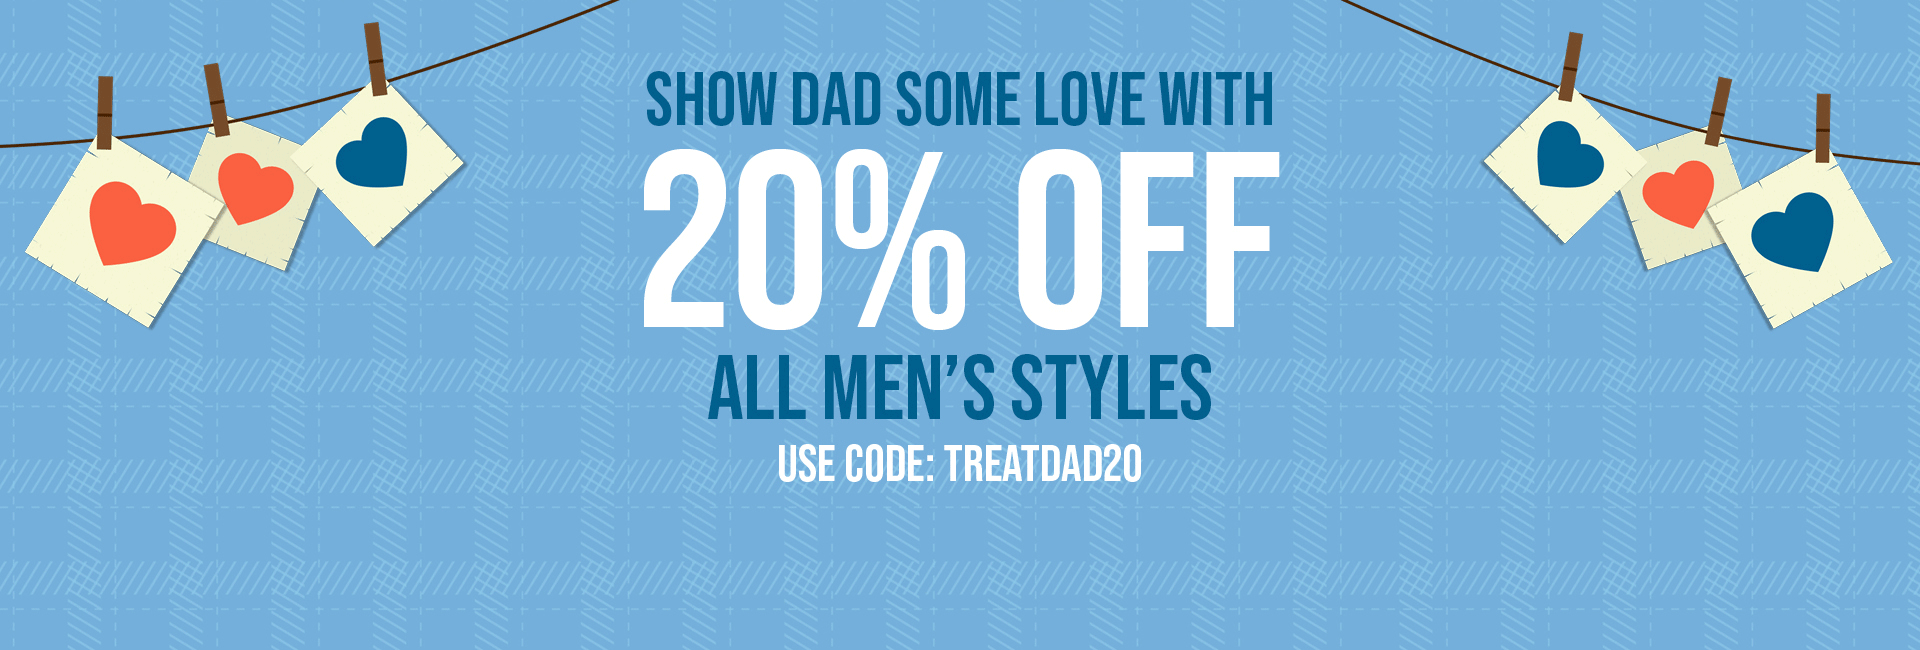 Extra 20% OFF on all men's styles